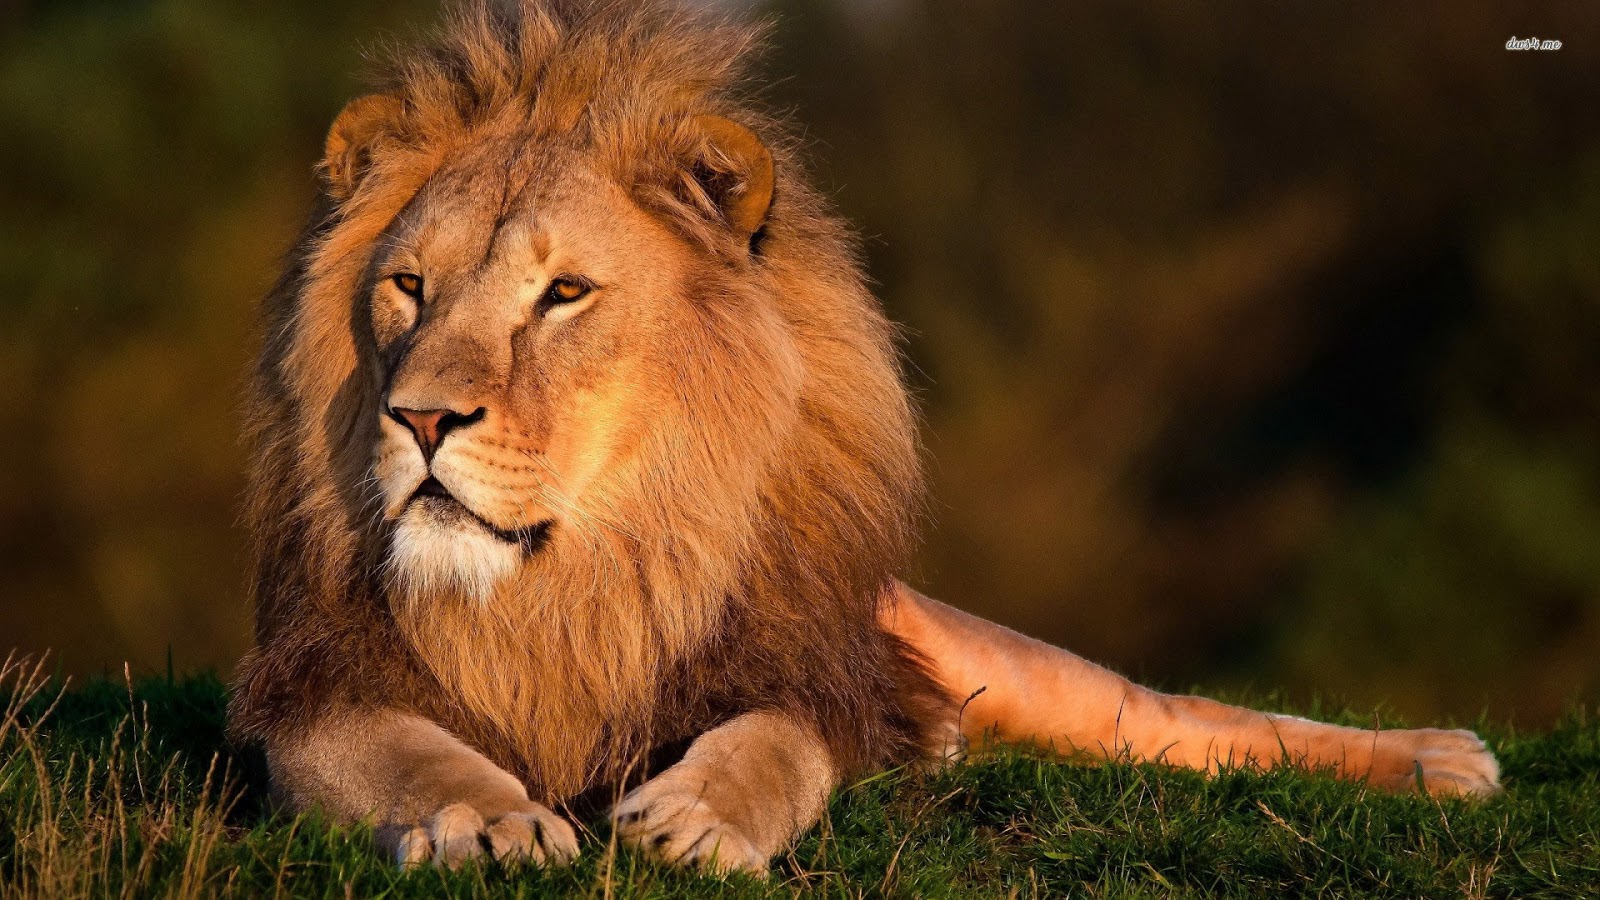 Lion Pictures HD Wallpaper Animal